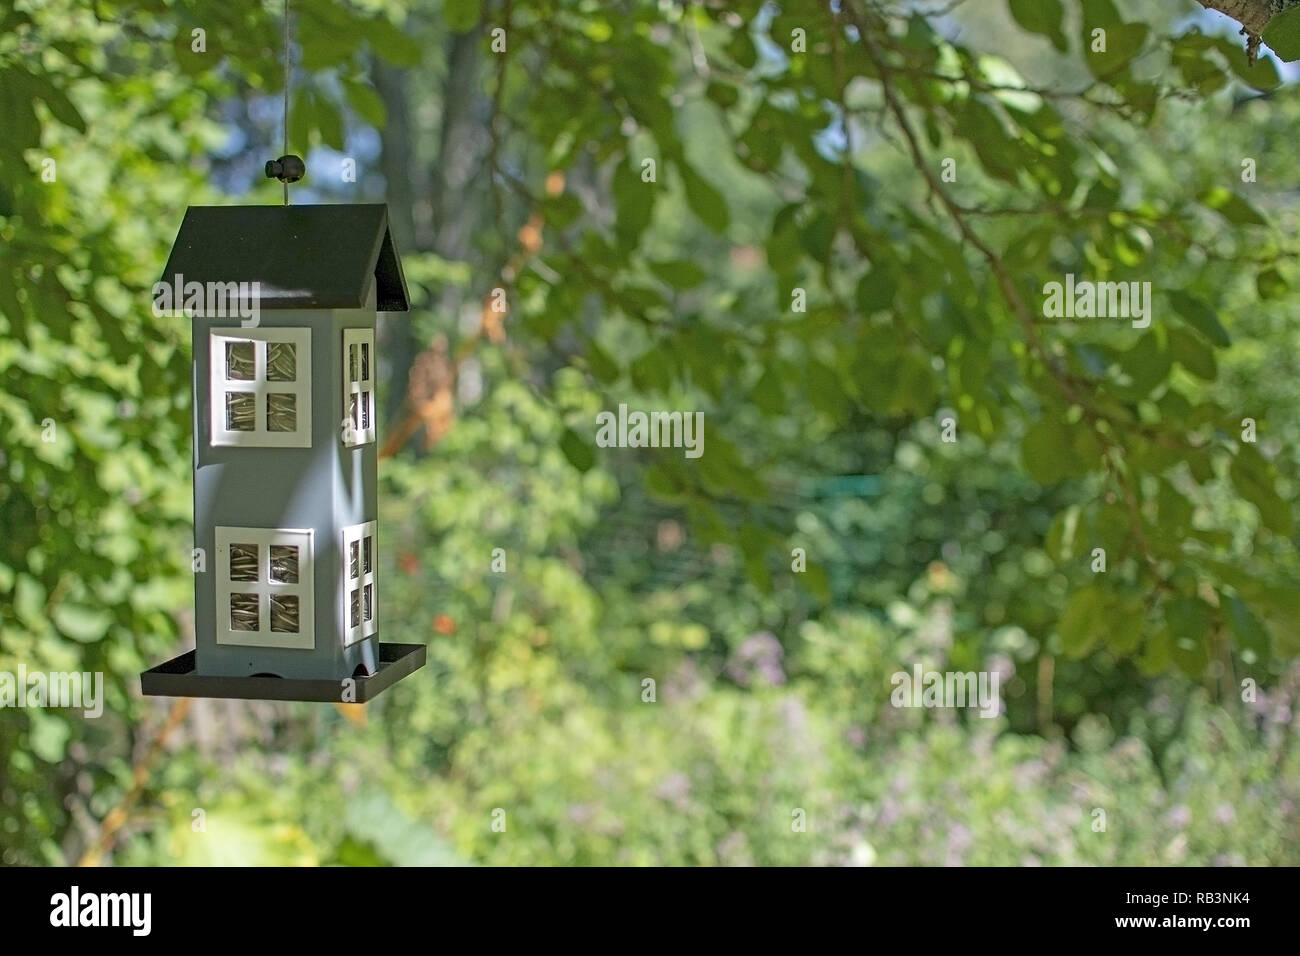 Cute birdhouse hanging in green garden concept for buying or selling real estate new home or starting a family Stock Photo